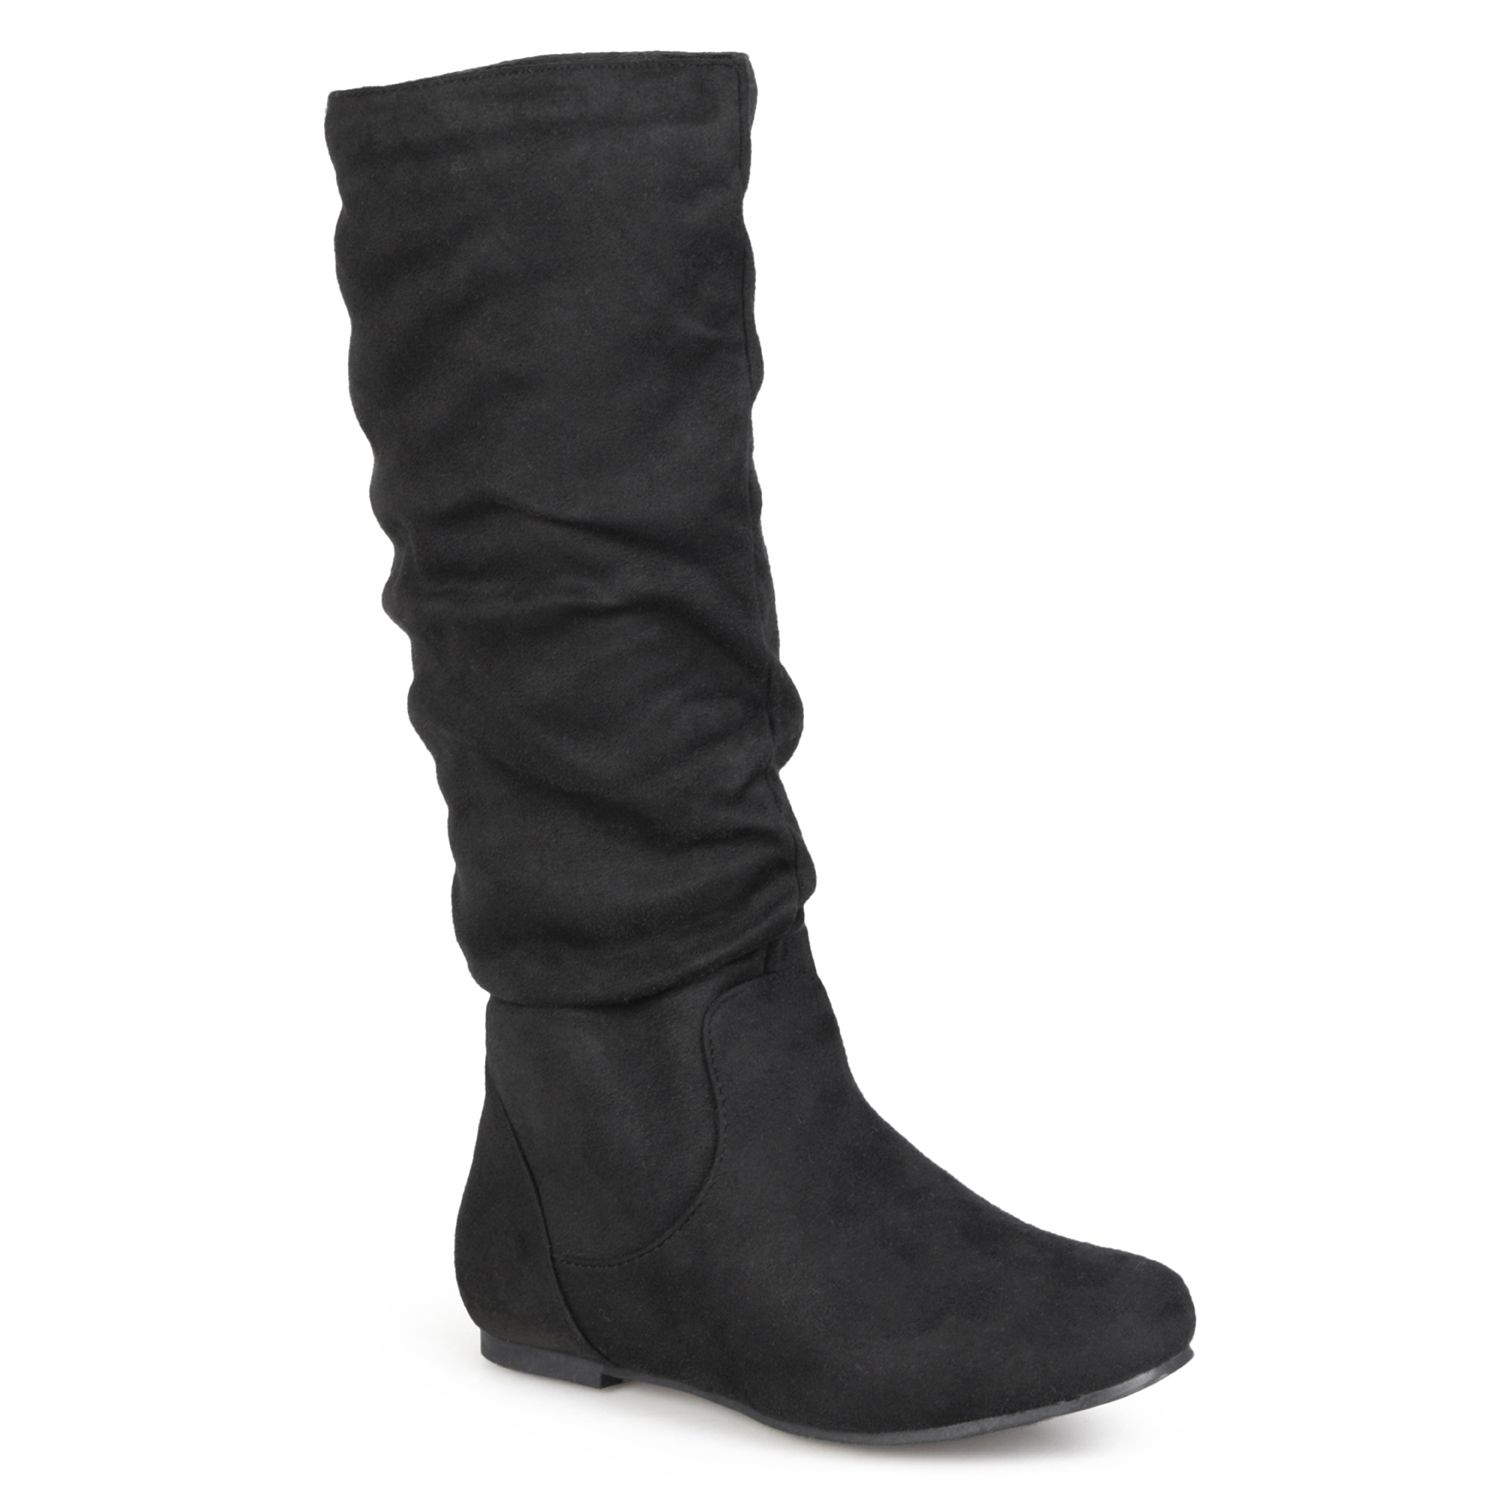 JOURNEE COLLECTION REBECCA KNEE-HIGH SLOUCH BOOTS - WOMEN